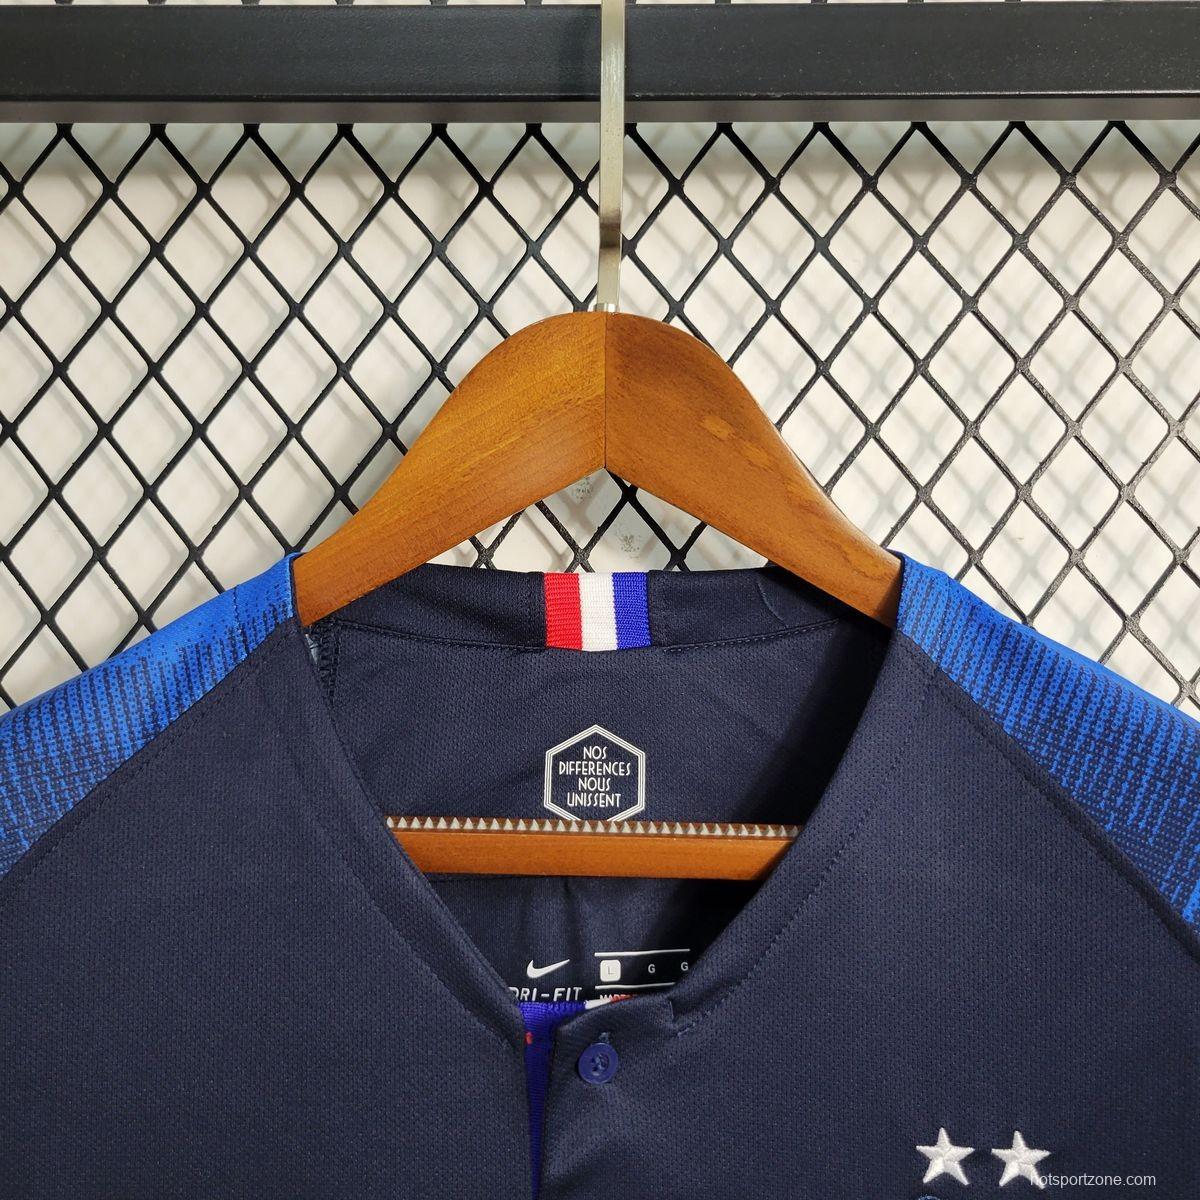 Retro 2018 France Home Jersey